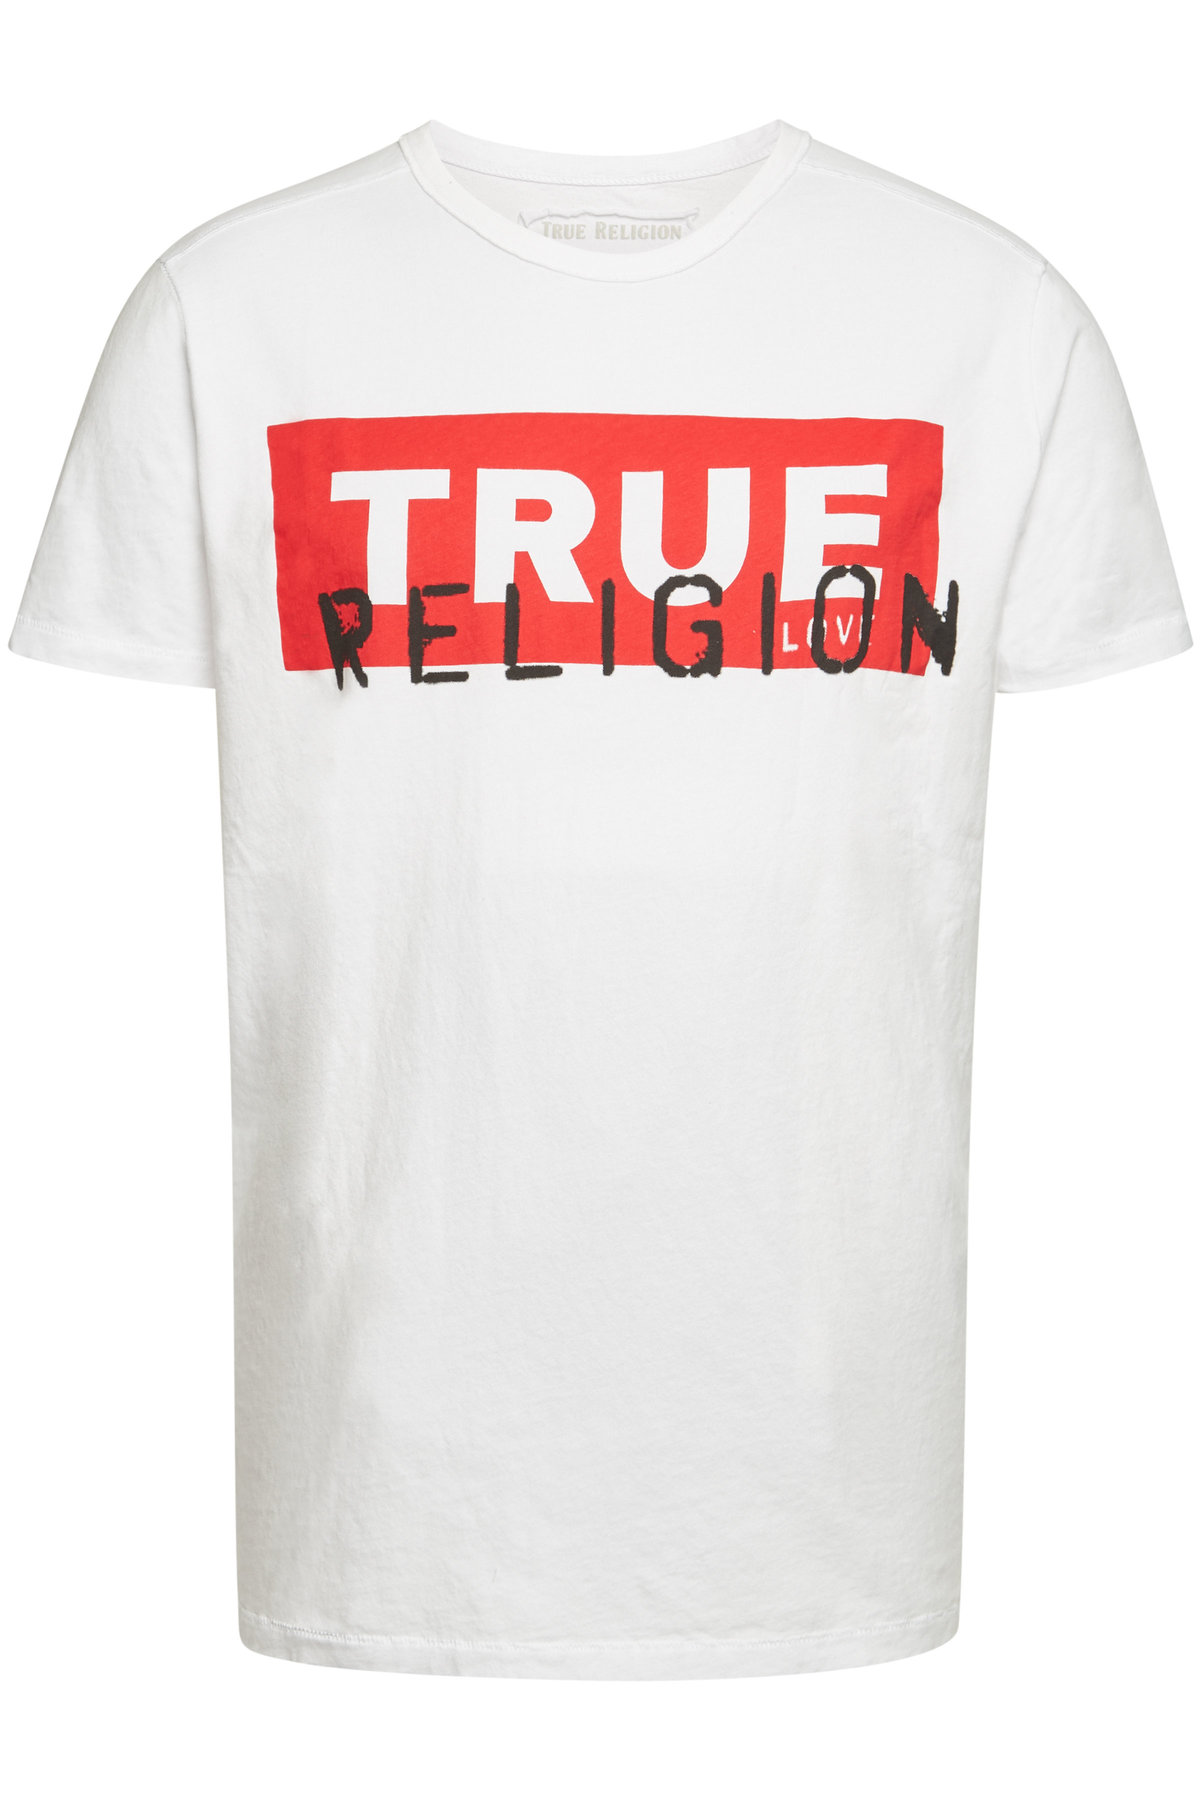 true religion shirt white and red